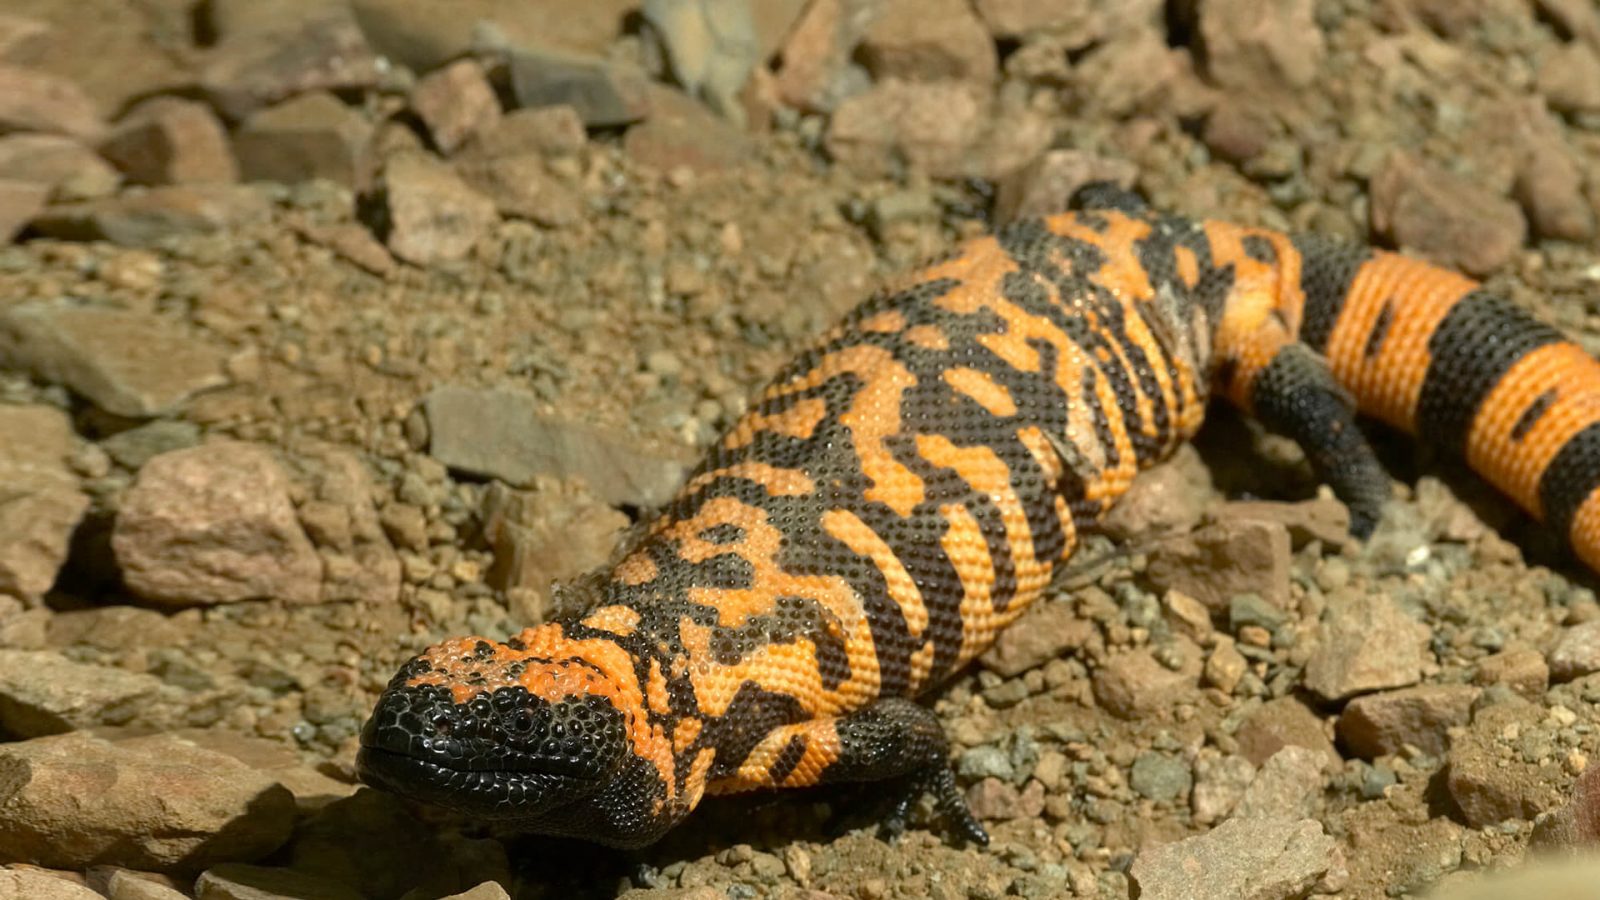 Can You Pass This “Jeopardy!” Trivia Quiz About Animals? A Gila Monster